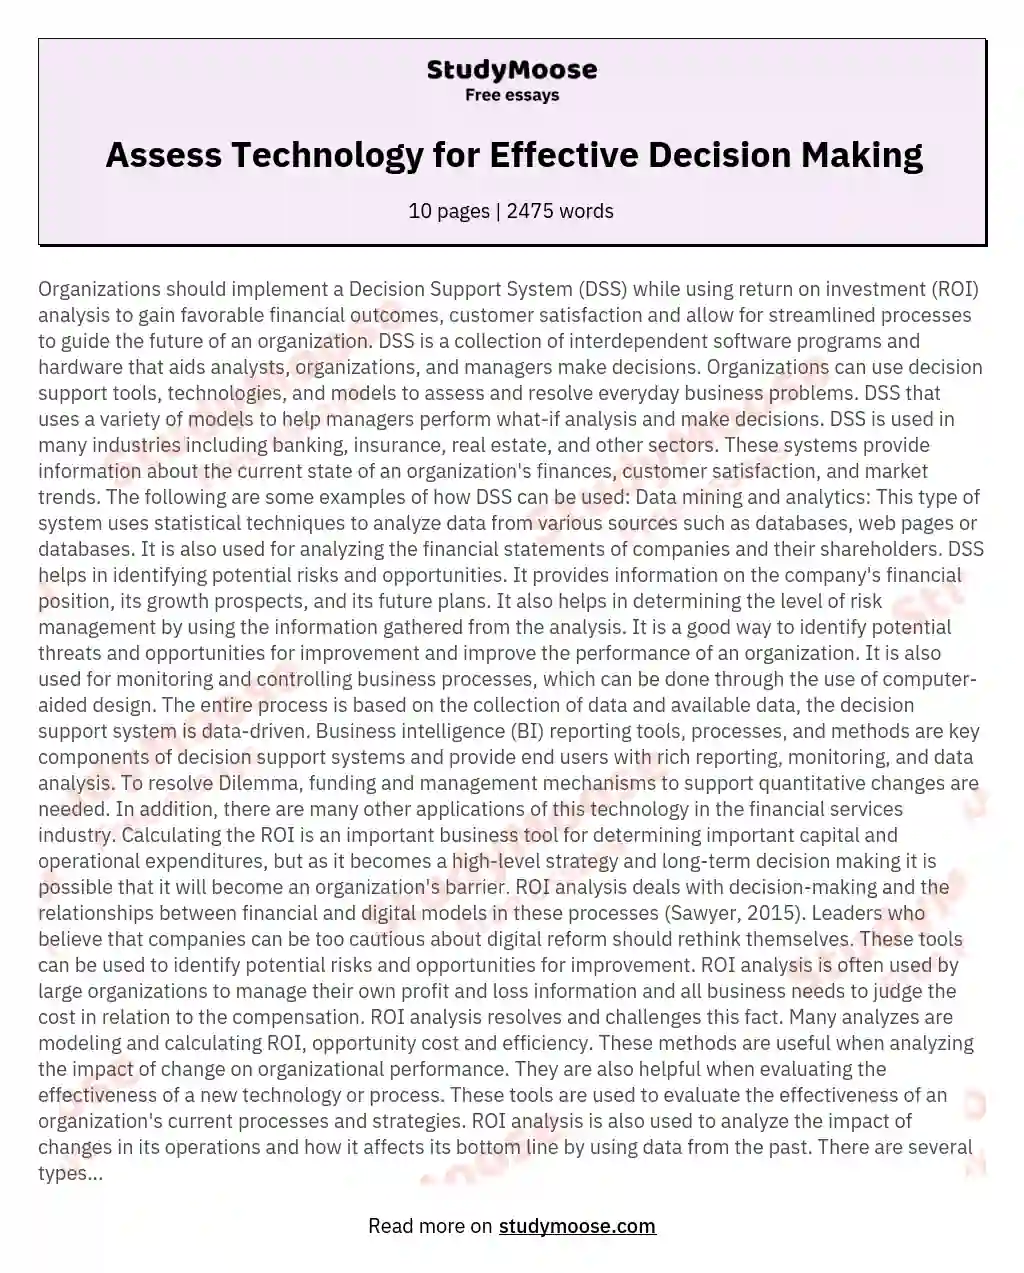 Assess Technology for Effective Decision Making essay